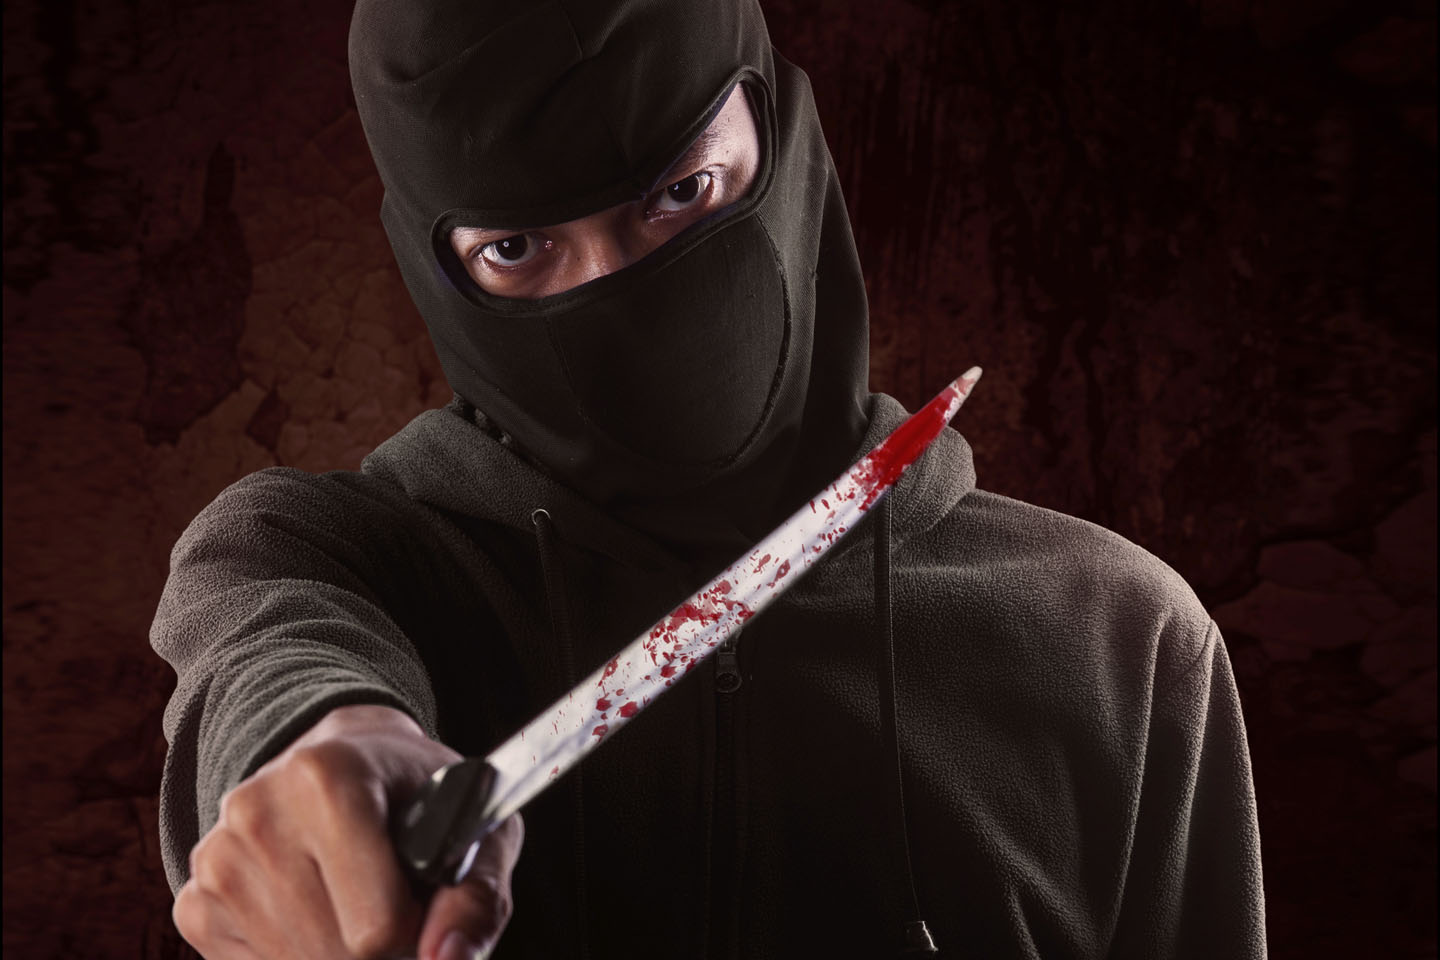 WEB-ISIS-KNIFE-MURDERER-BLOOD-Shutterstock_339923321-Creativa Images-AI